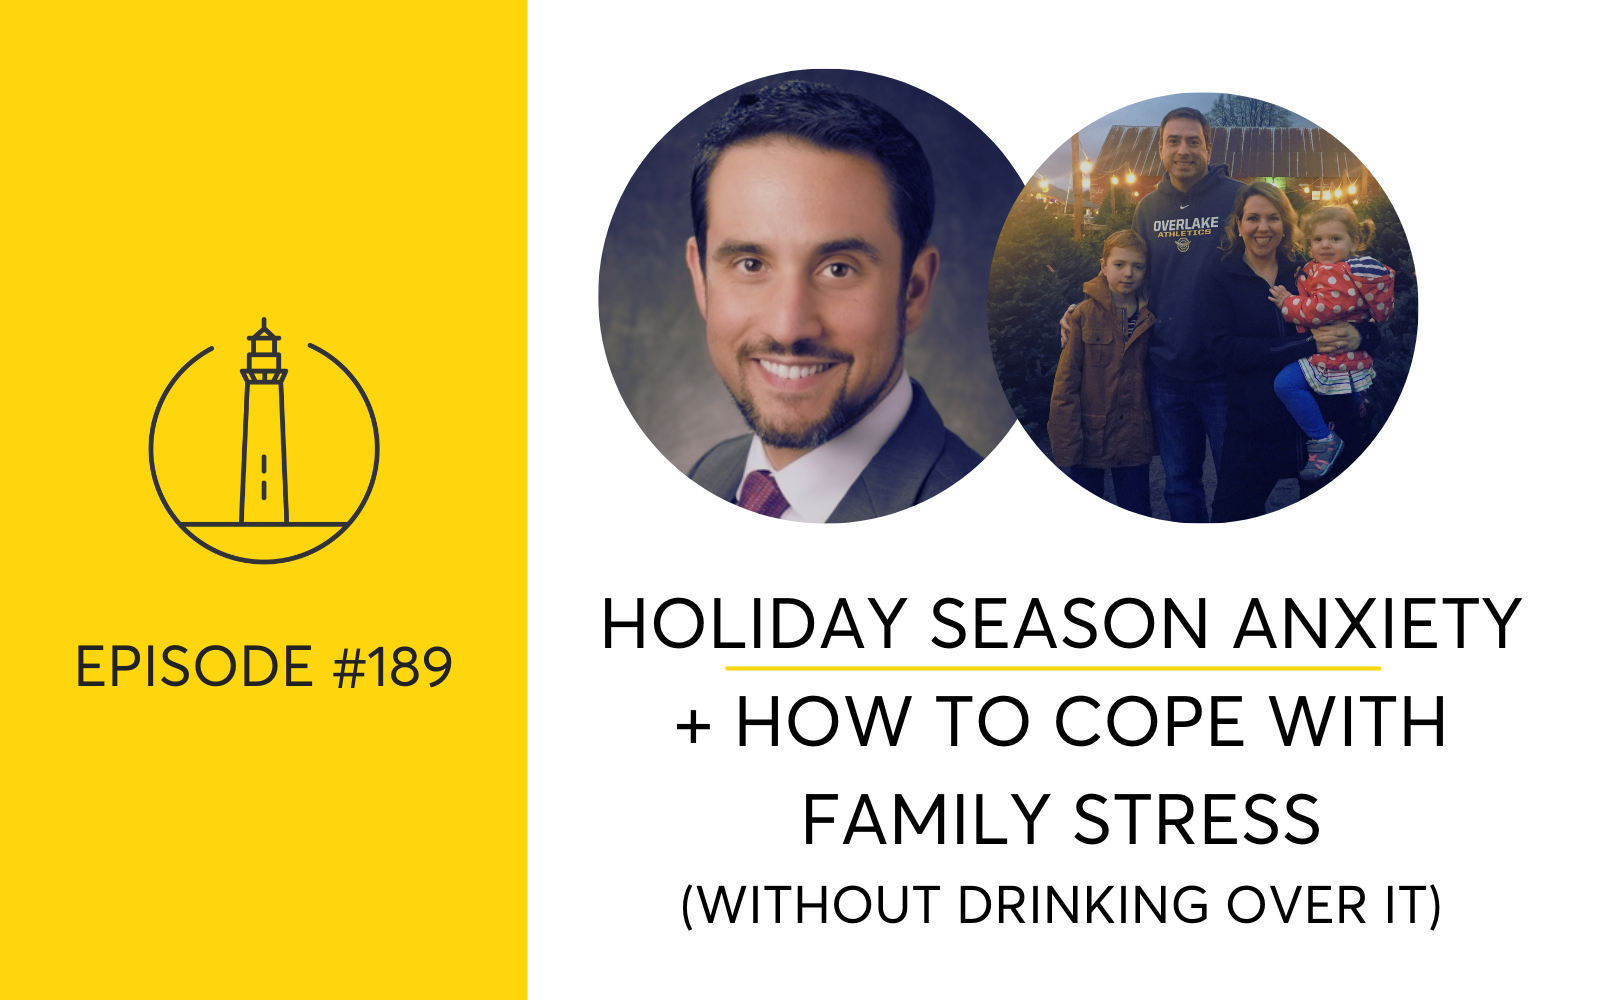 How To Cope With Holiday Season Anxiety and Family Stress Without Drinking